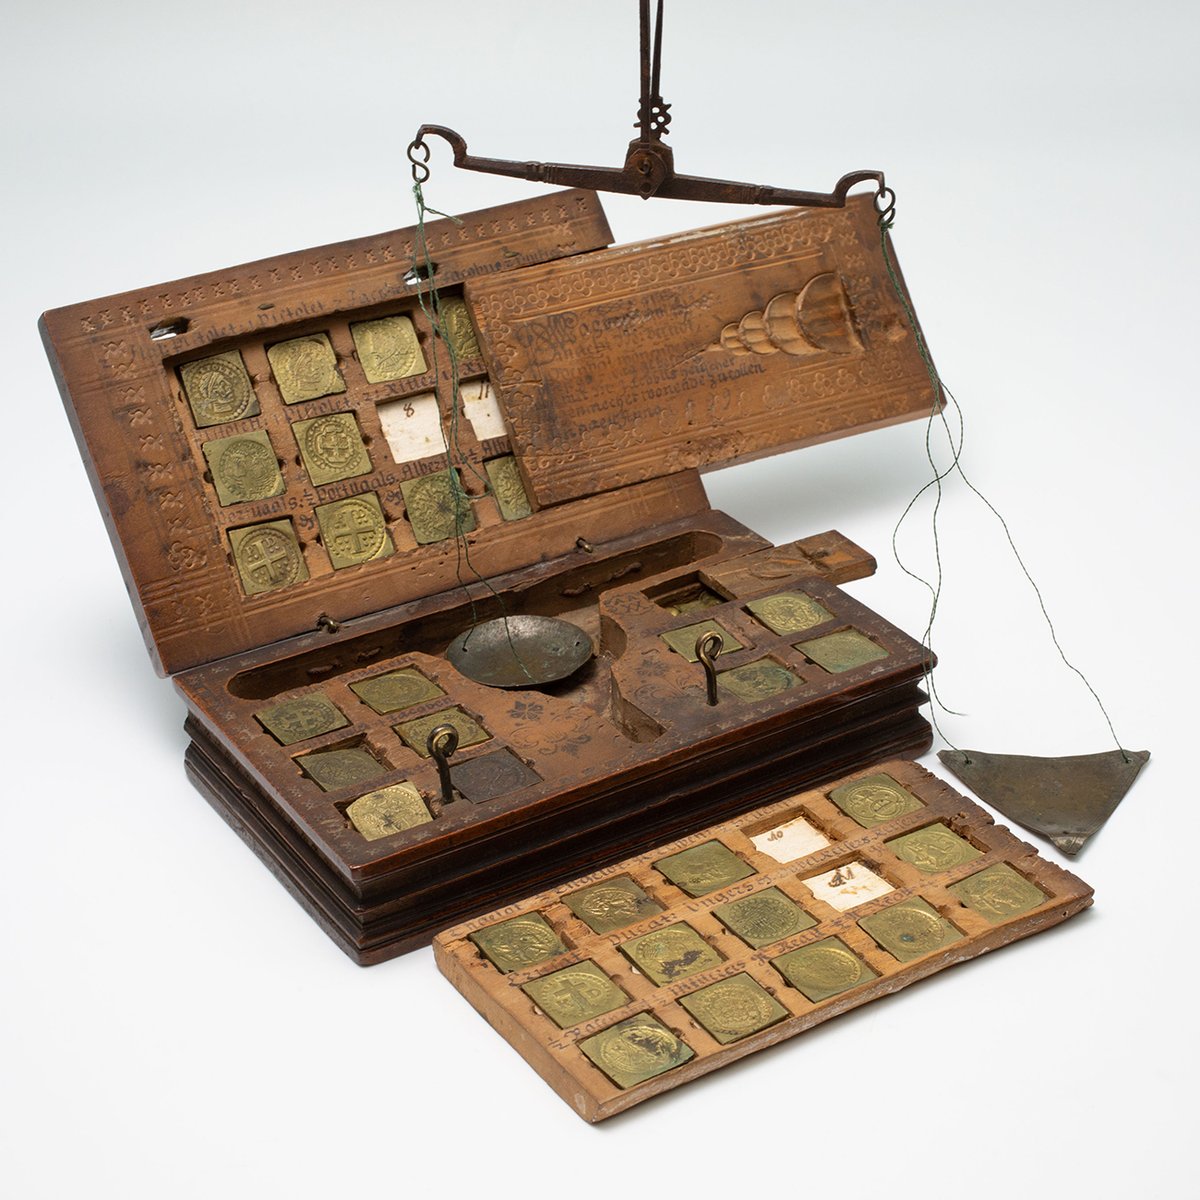 It’s all about balance! Balances were used to check the weight of medieval coins. A coin would be placed in the balance’s flat triangular pan, while a brass piece, equivalent to the coin’s standard weight, was set in the round pan.